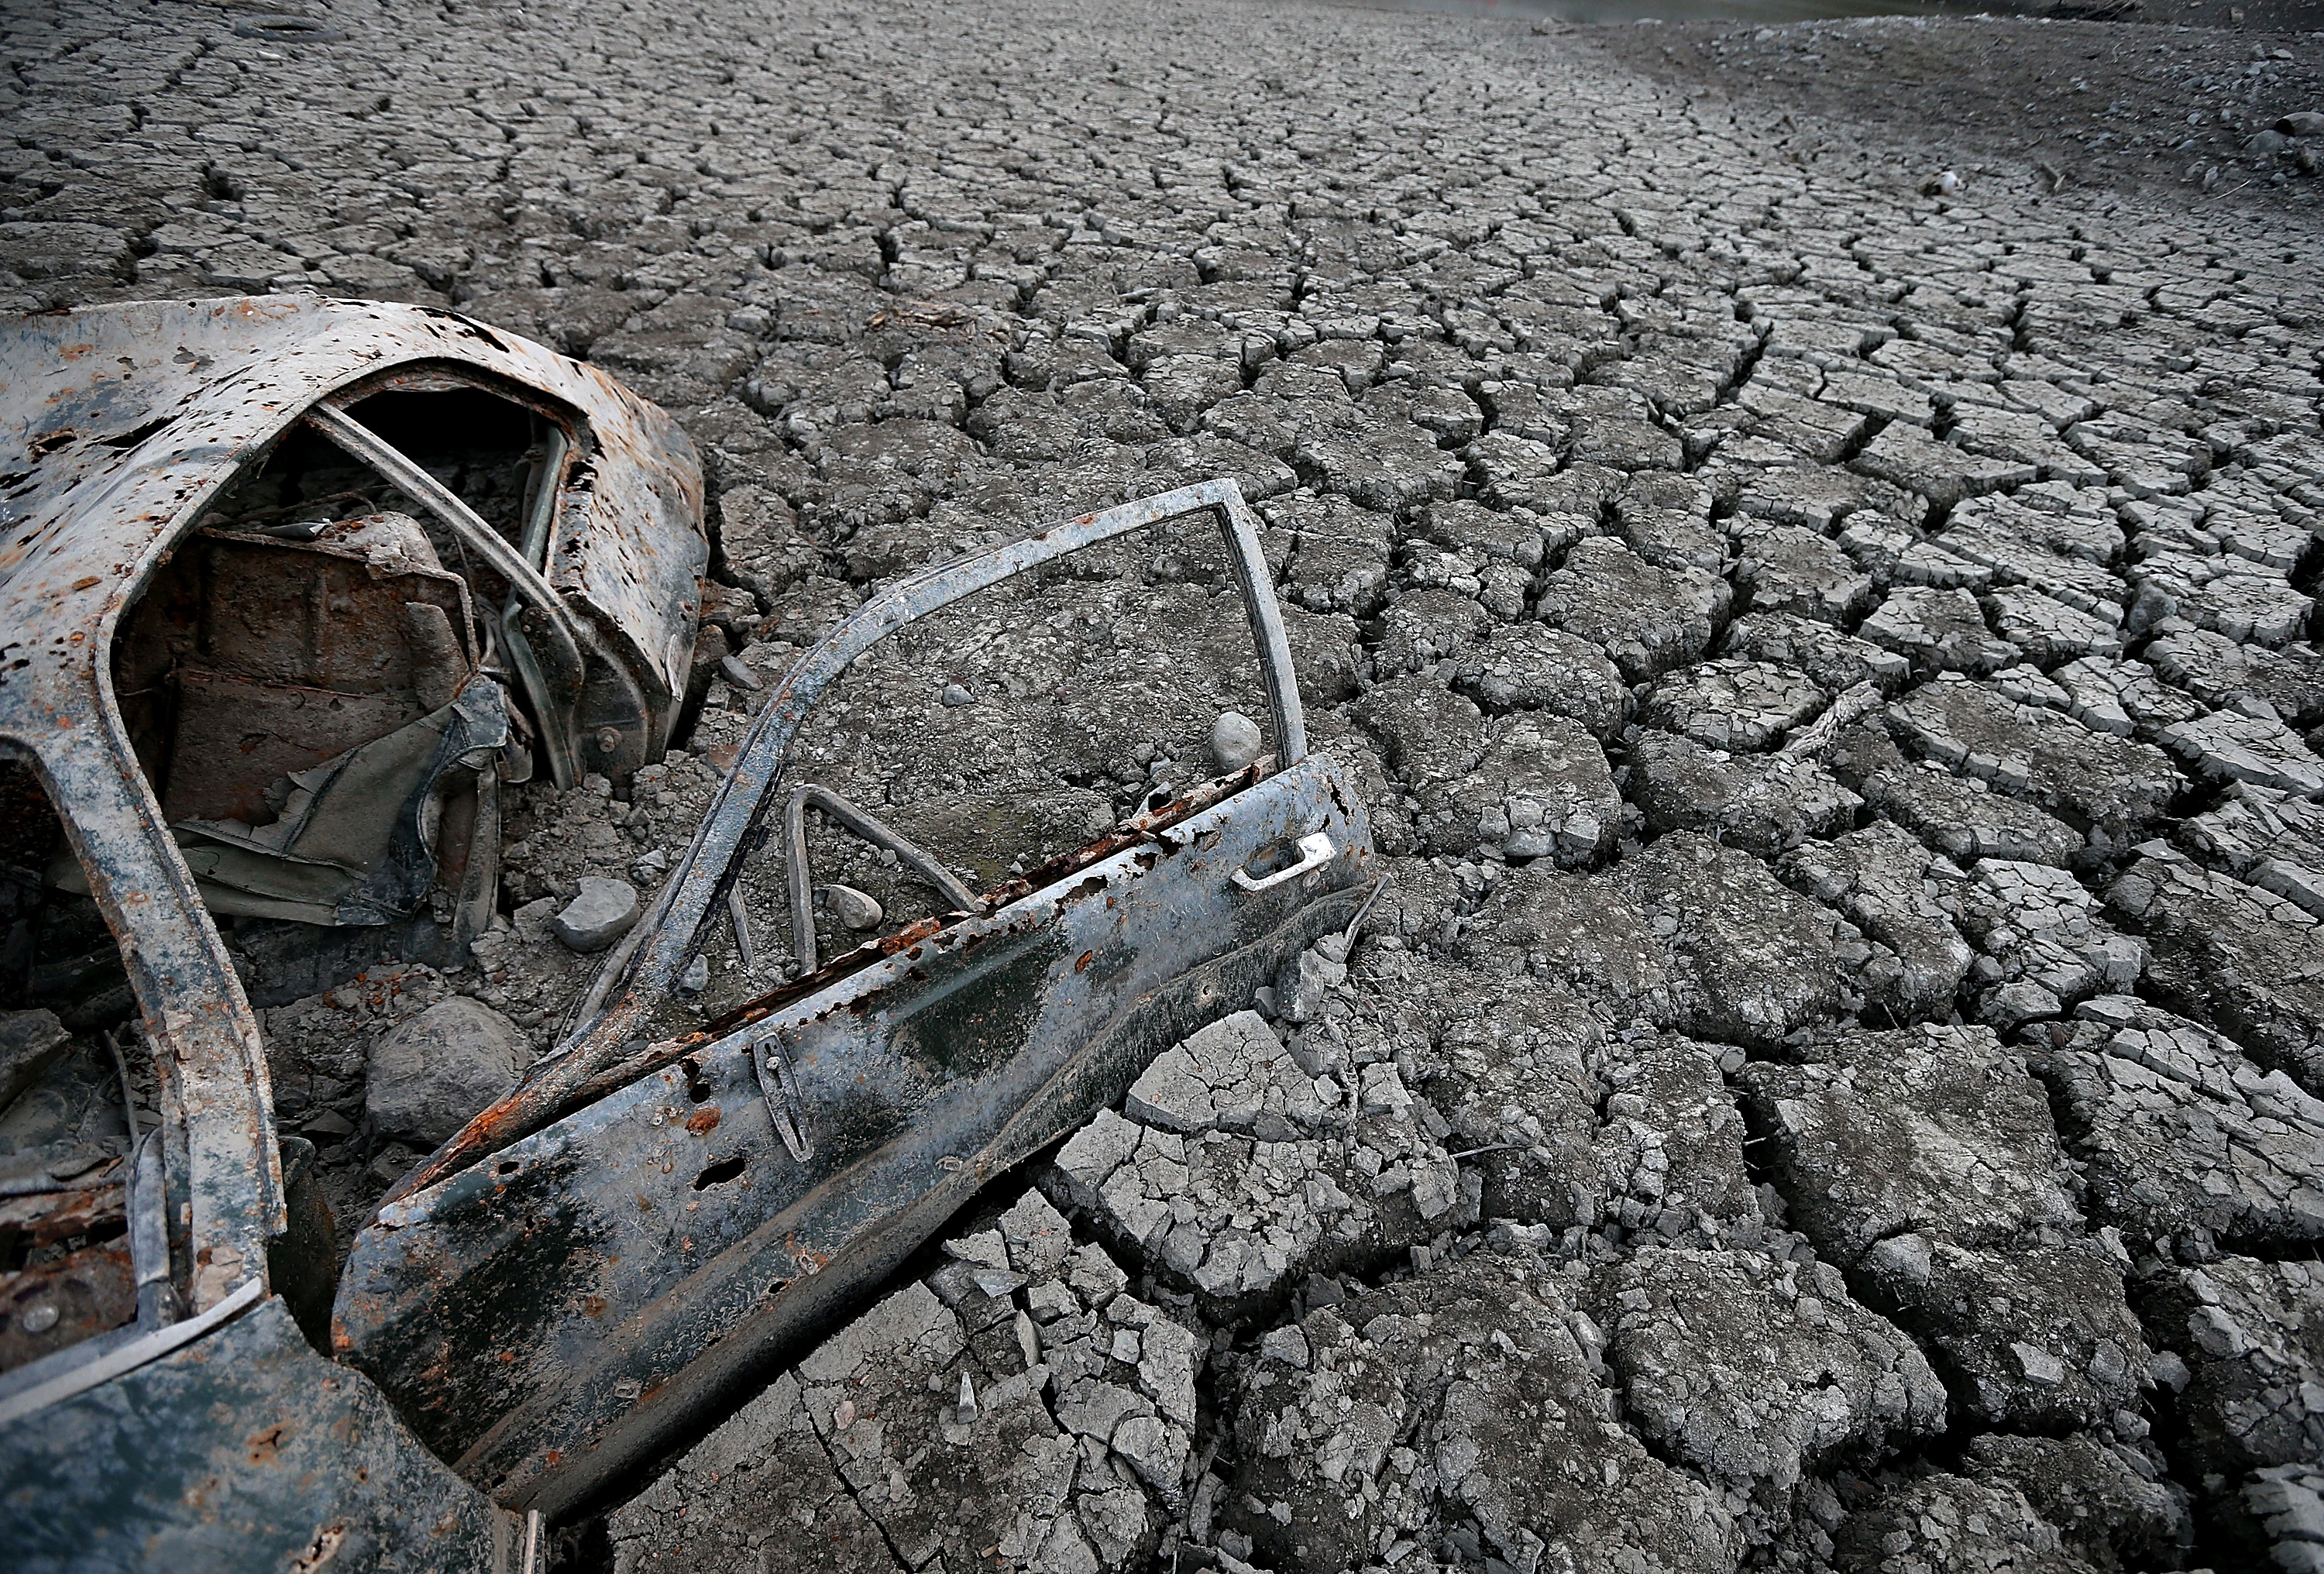 A car sits in dried and cracked earth of what was the bottom of the Almaden Reservoir on Jan. 28, 2014 in San Jose, Calif. (Justin Sullivan—Getty Images)